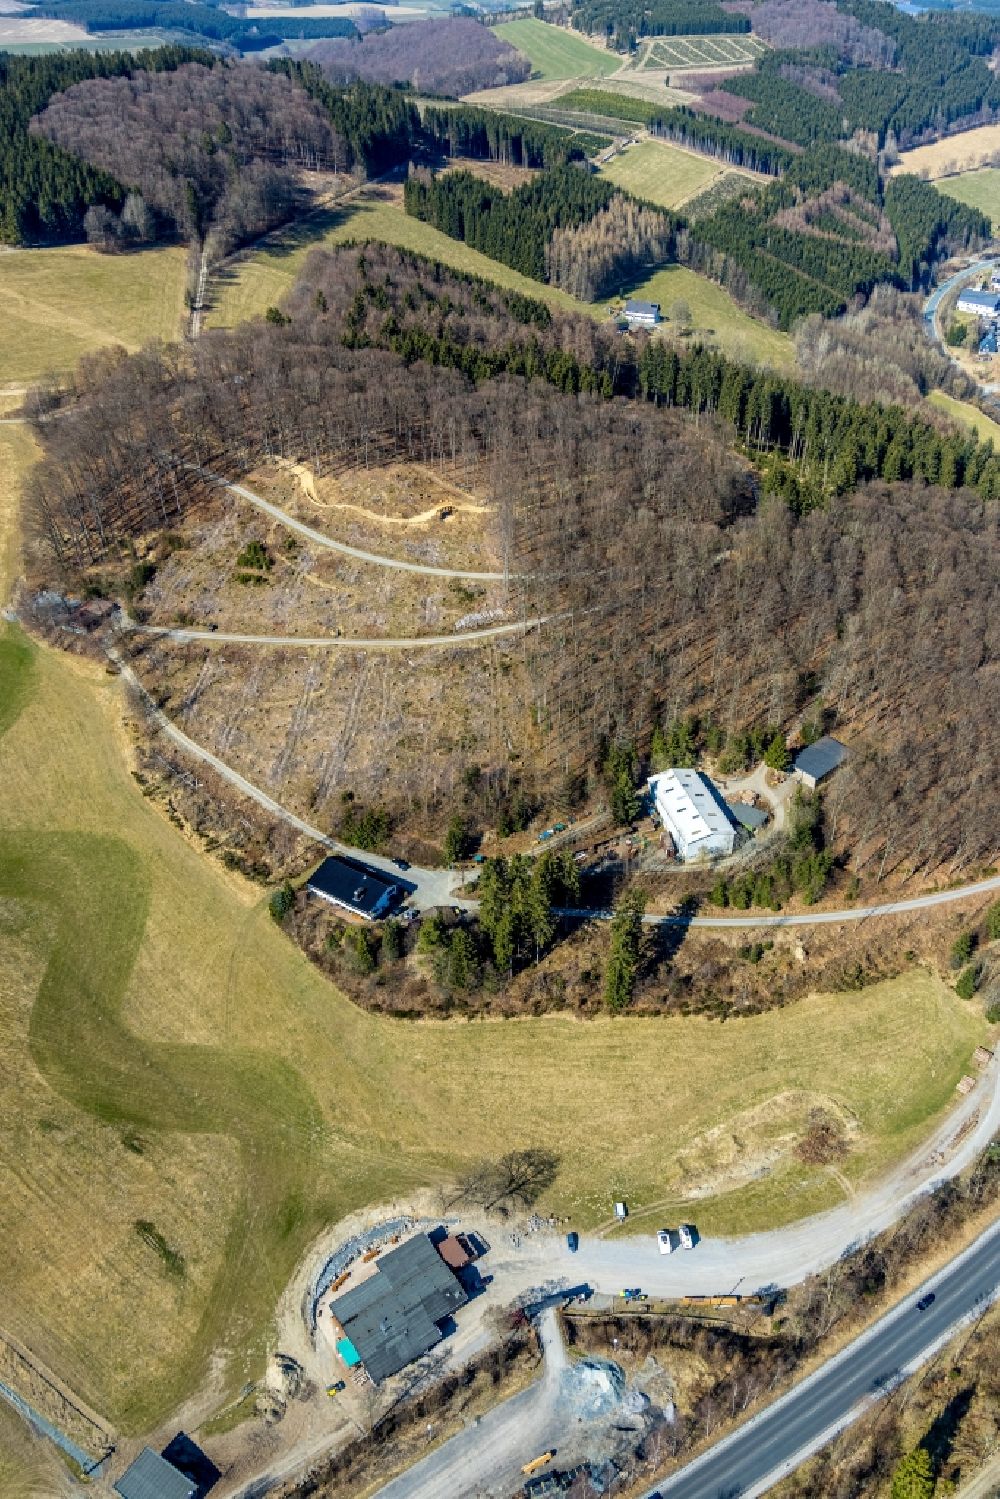 Aerial photograph Schmallenberg - Mountain slope with downhill ski slope and cable car - lift of Ski- and Freizeitgebiet Hohe Lied with Hellermanns Huette in the district Gellinghausen in Schmallenberg at Sauerland in the state North Rhine-Westphalia, Germany